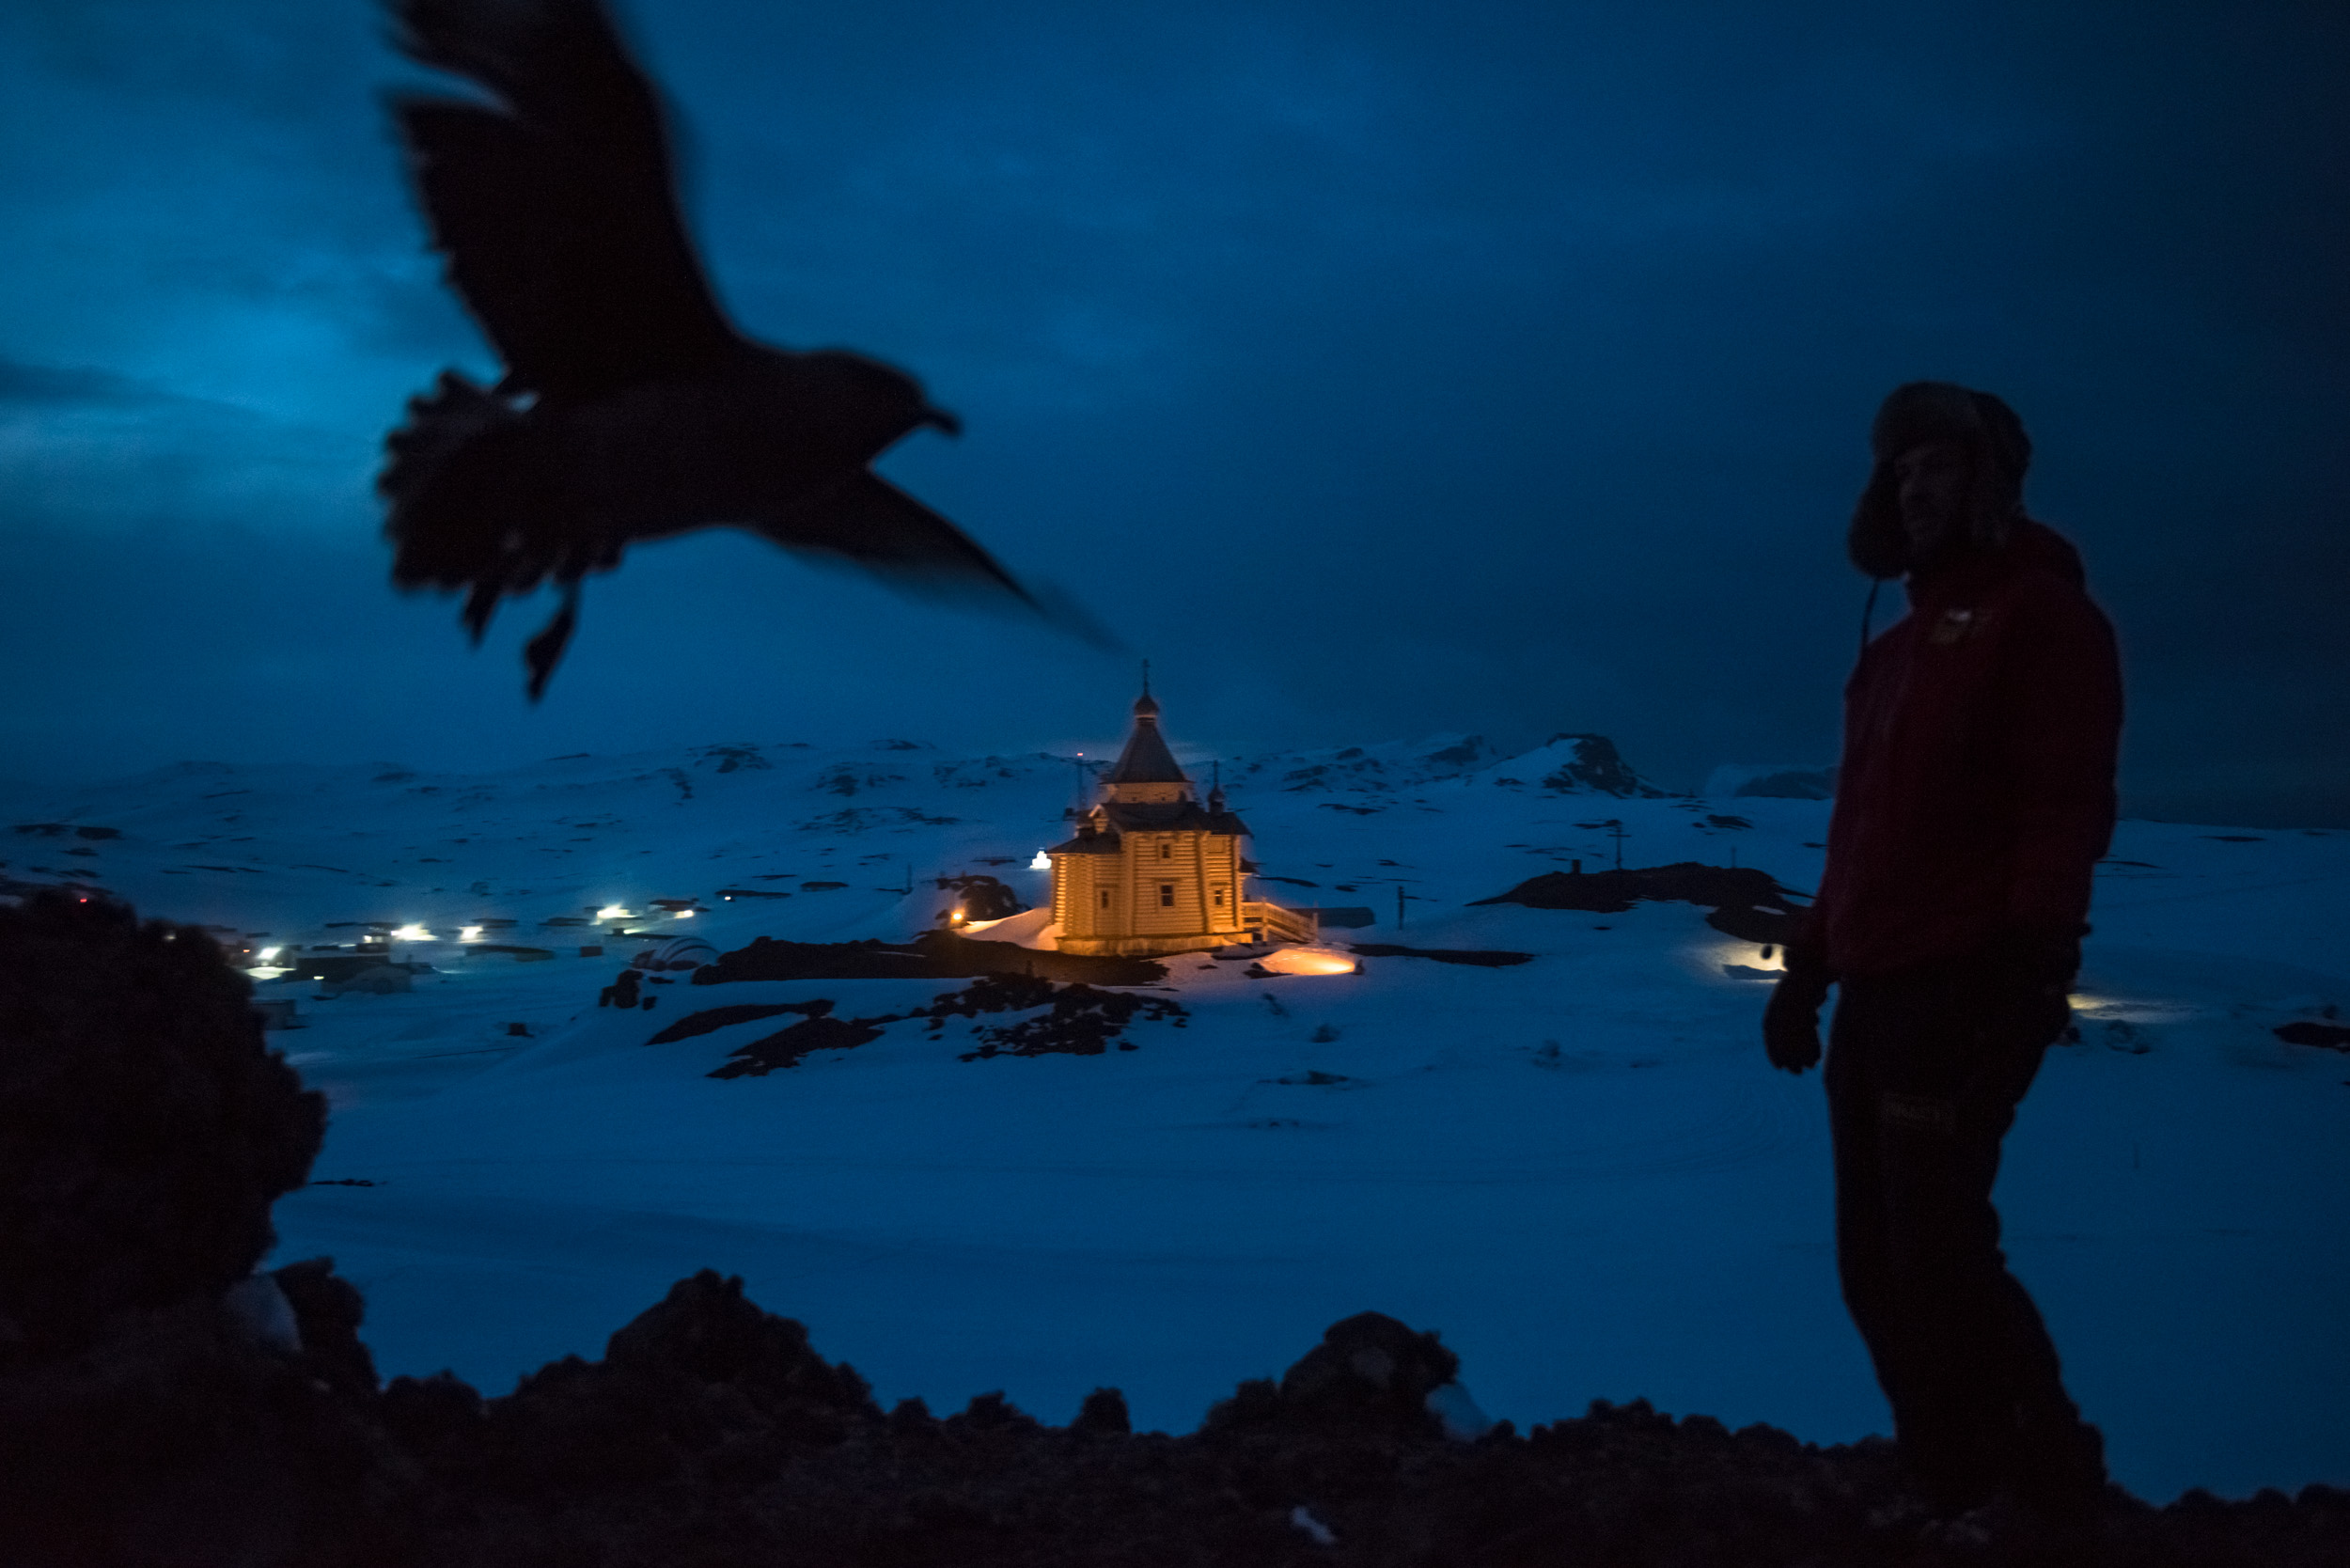  On a glacier-filled island with fjords and elephant seals, Russia has built Antarctica’s first Orthodox church on a hill overlooking its research base, transporting the logs all the way from Siberia. Less than an hour away by snowmobile, Chinese lab